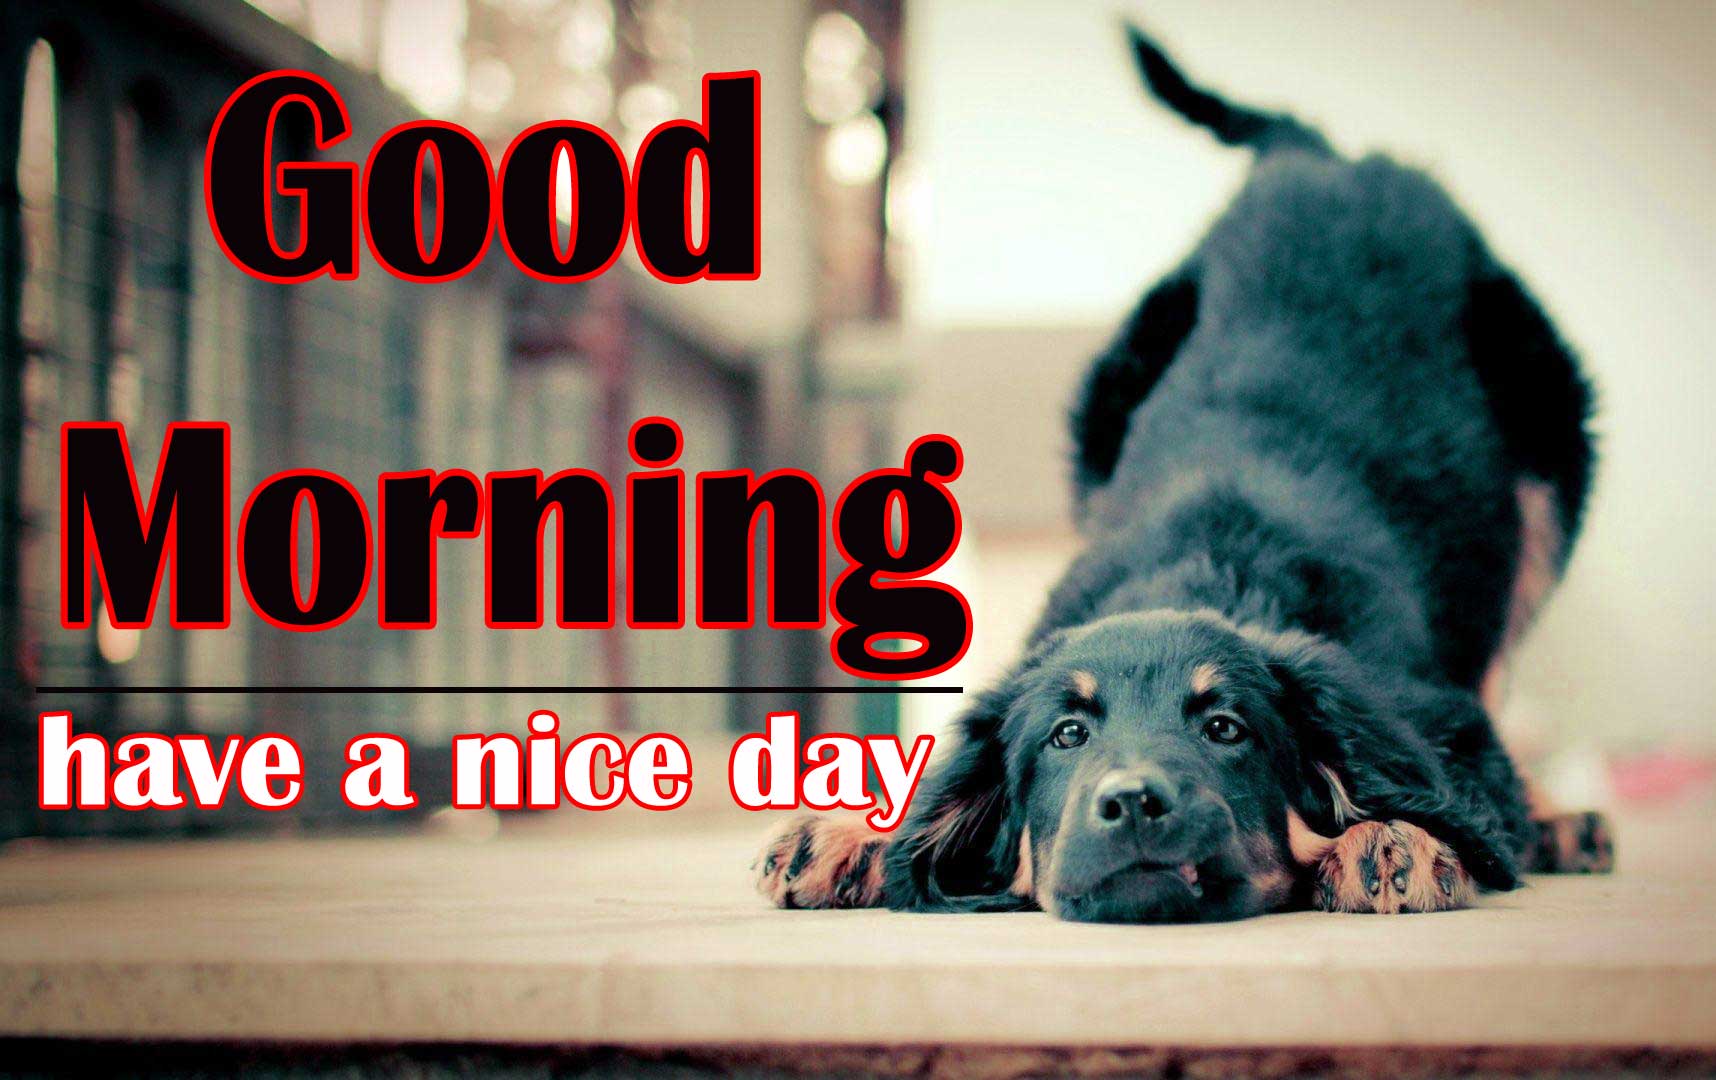 Good Morning Images Wallpaper New Download 